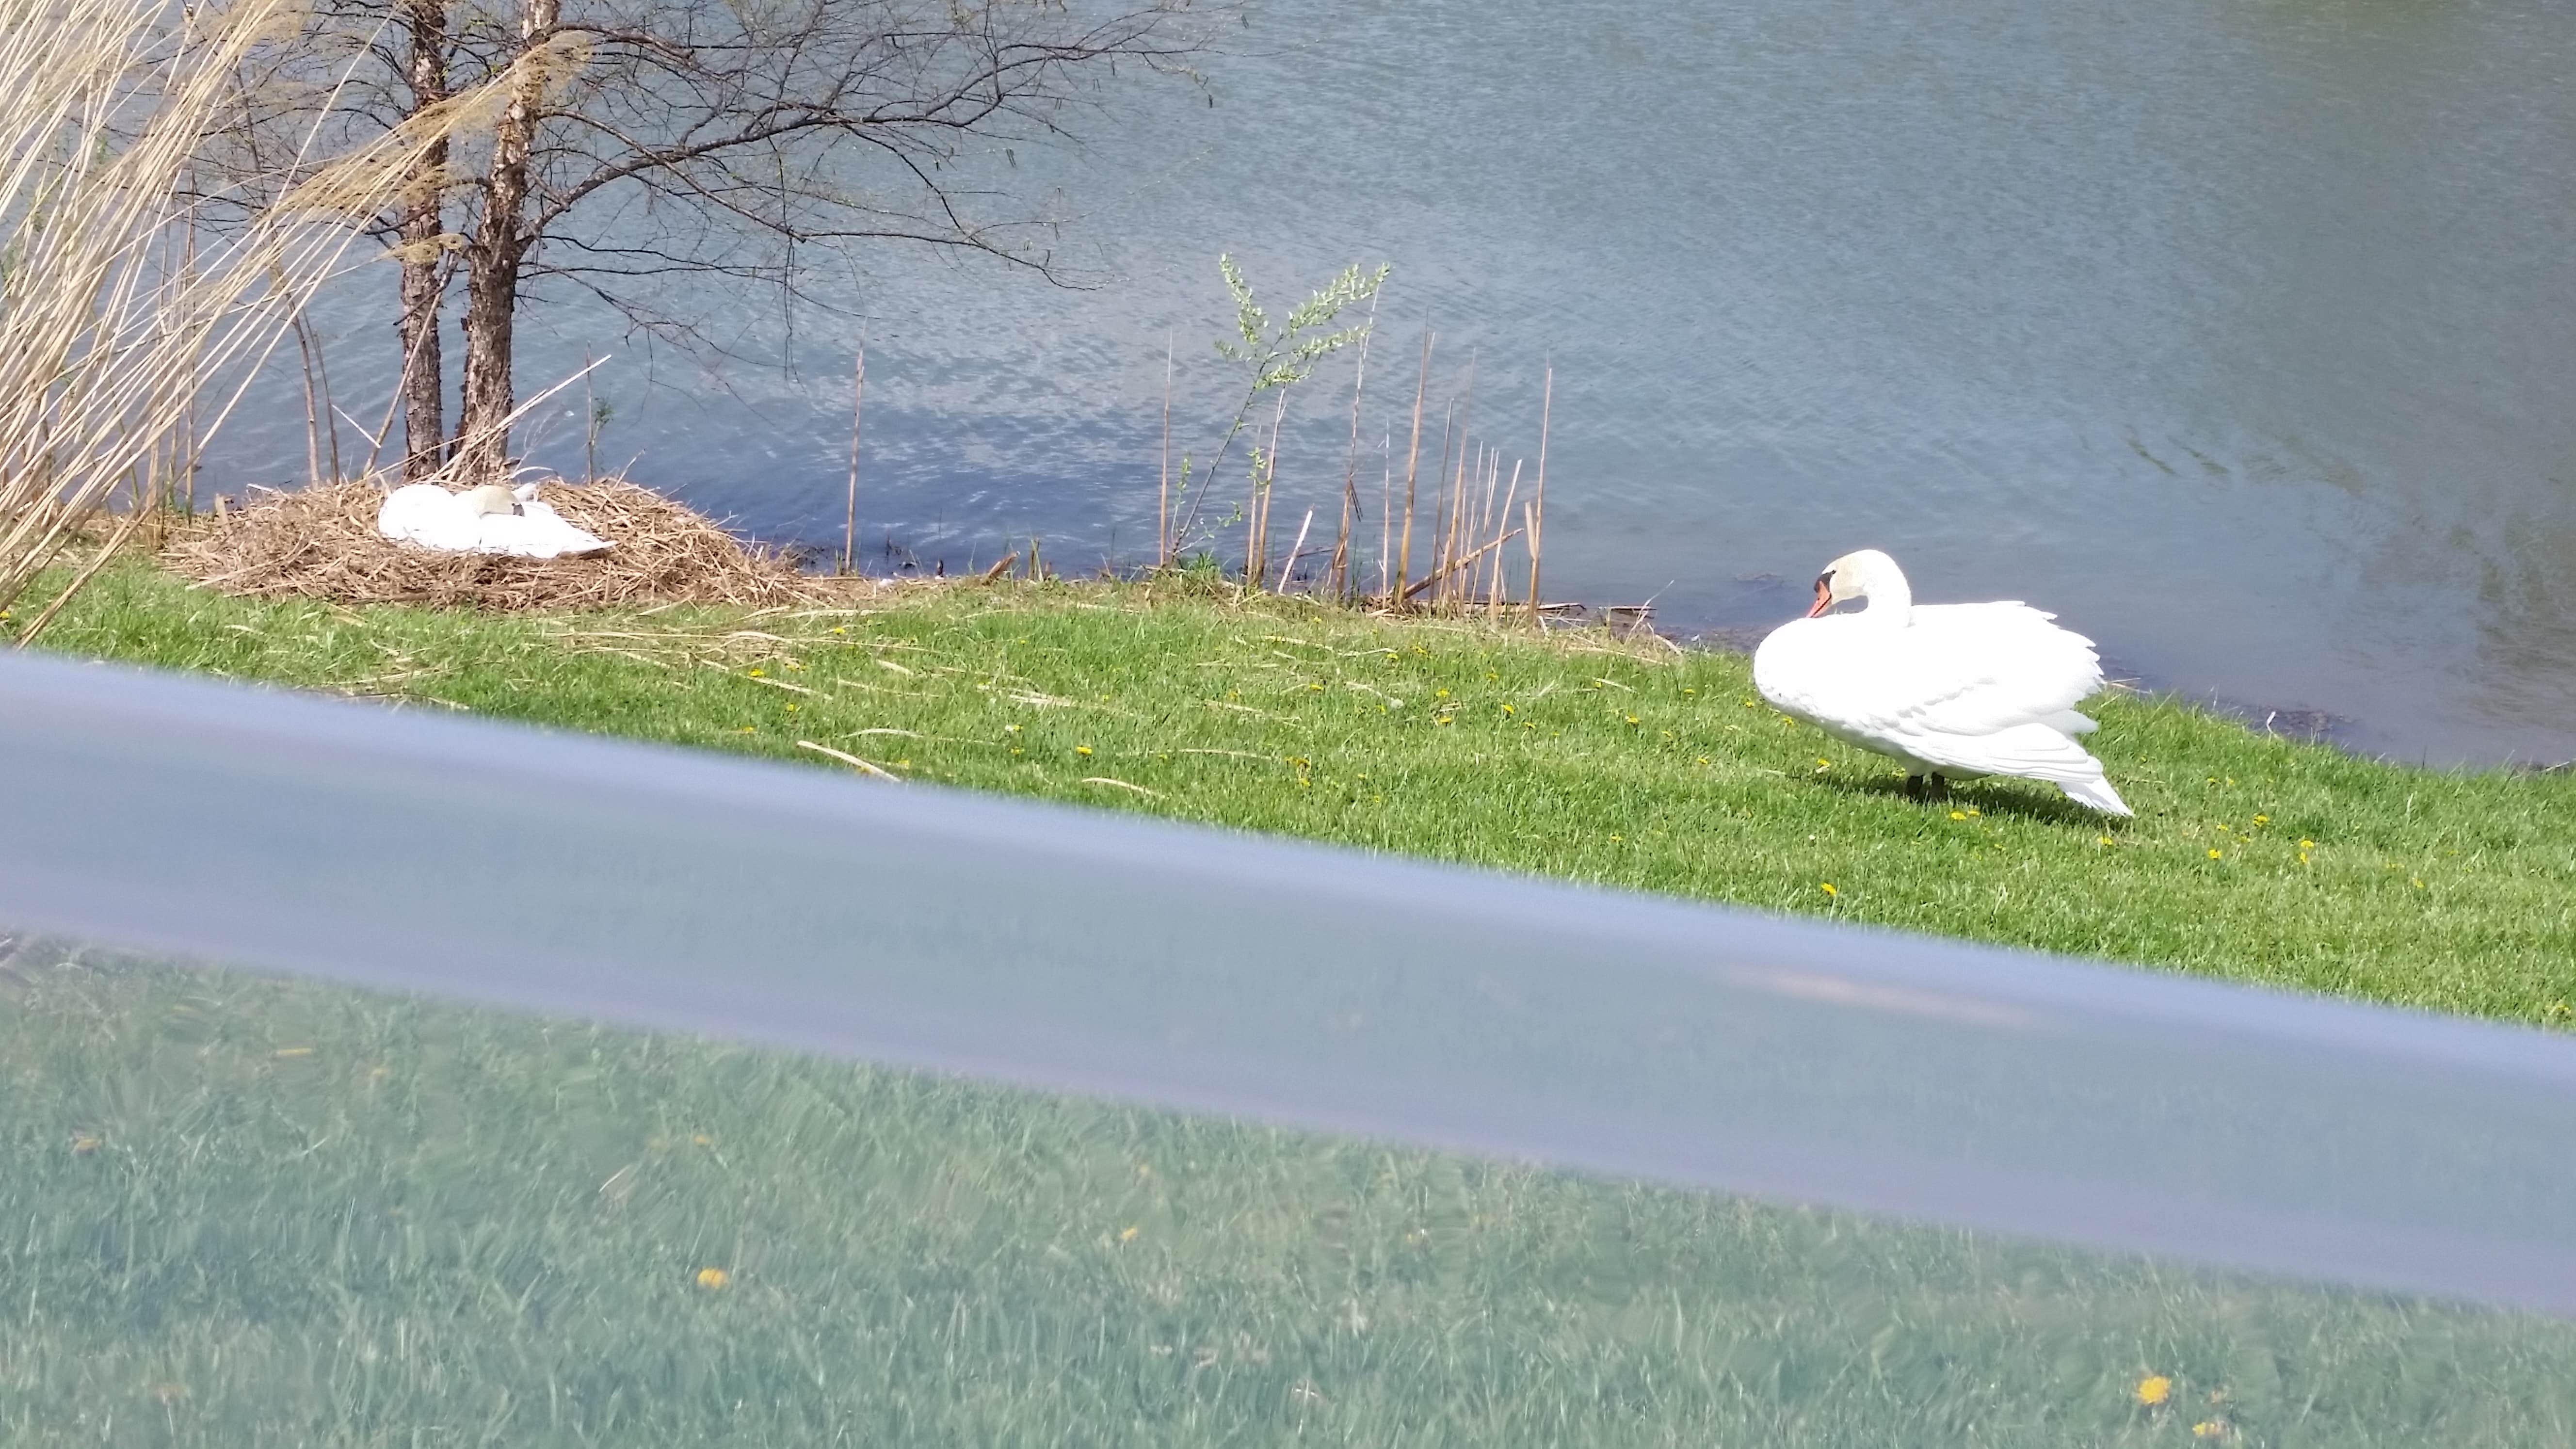 Swans stay on our pond year round